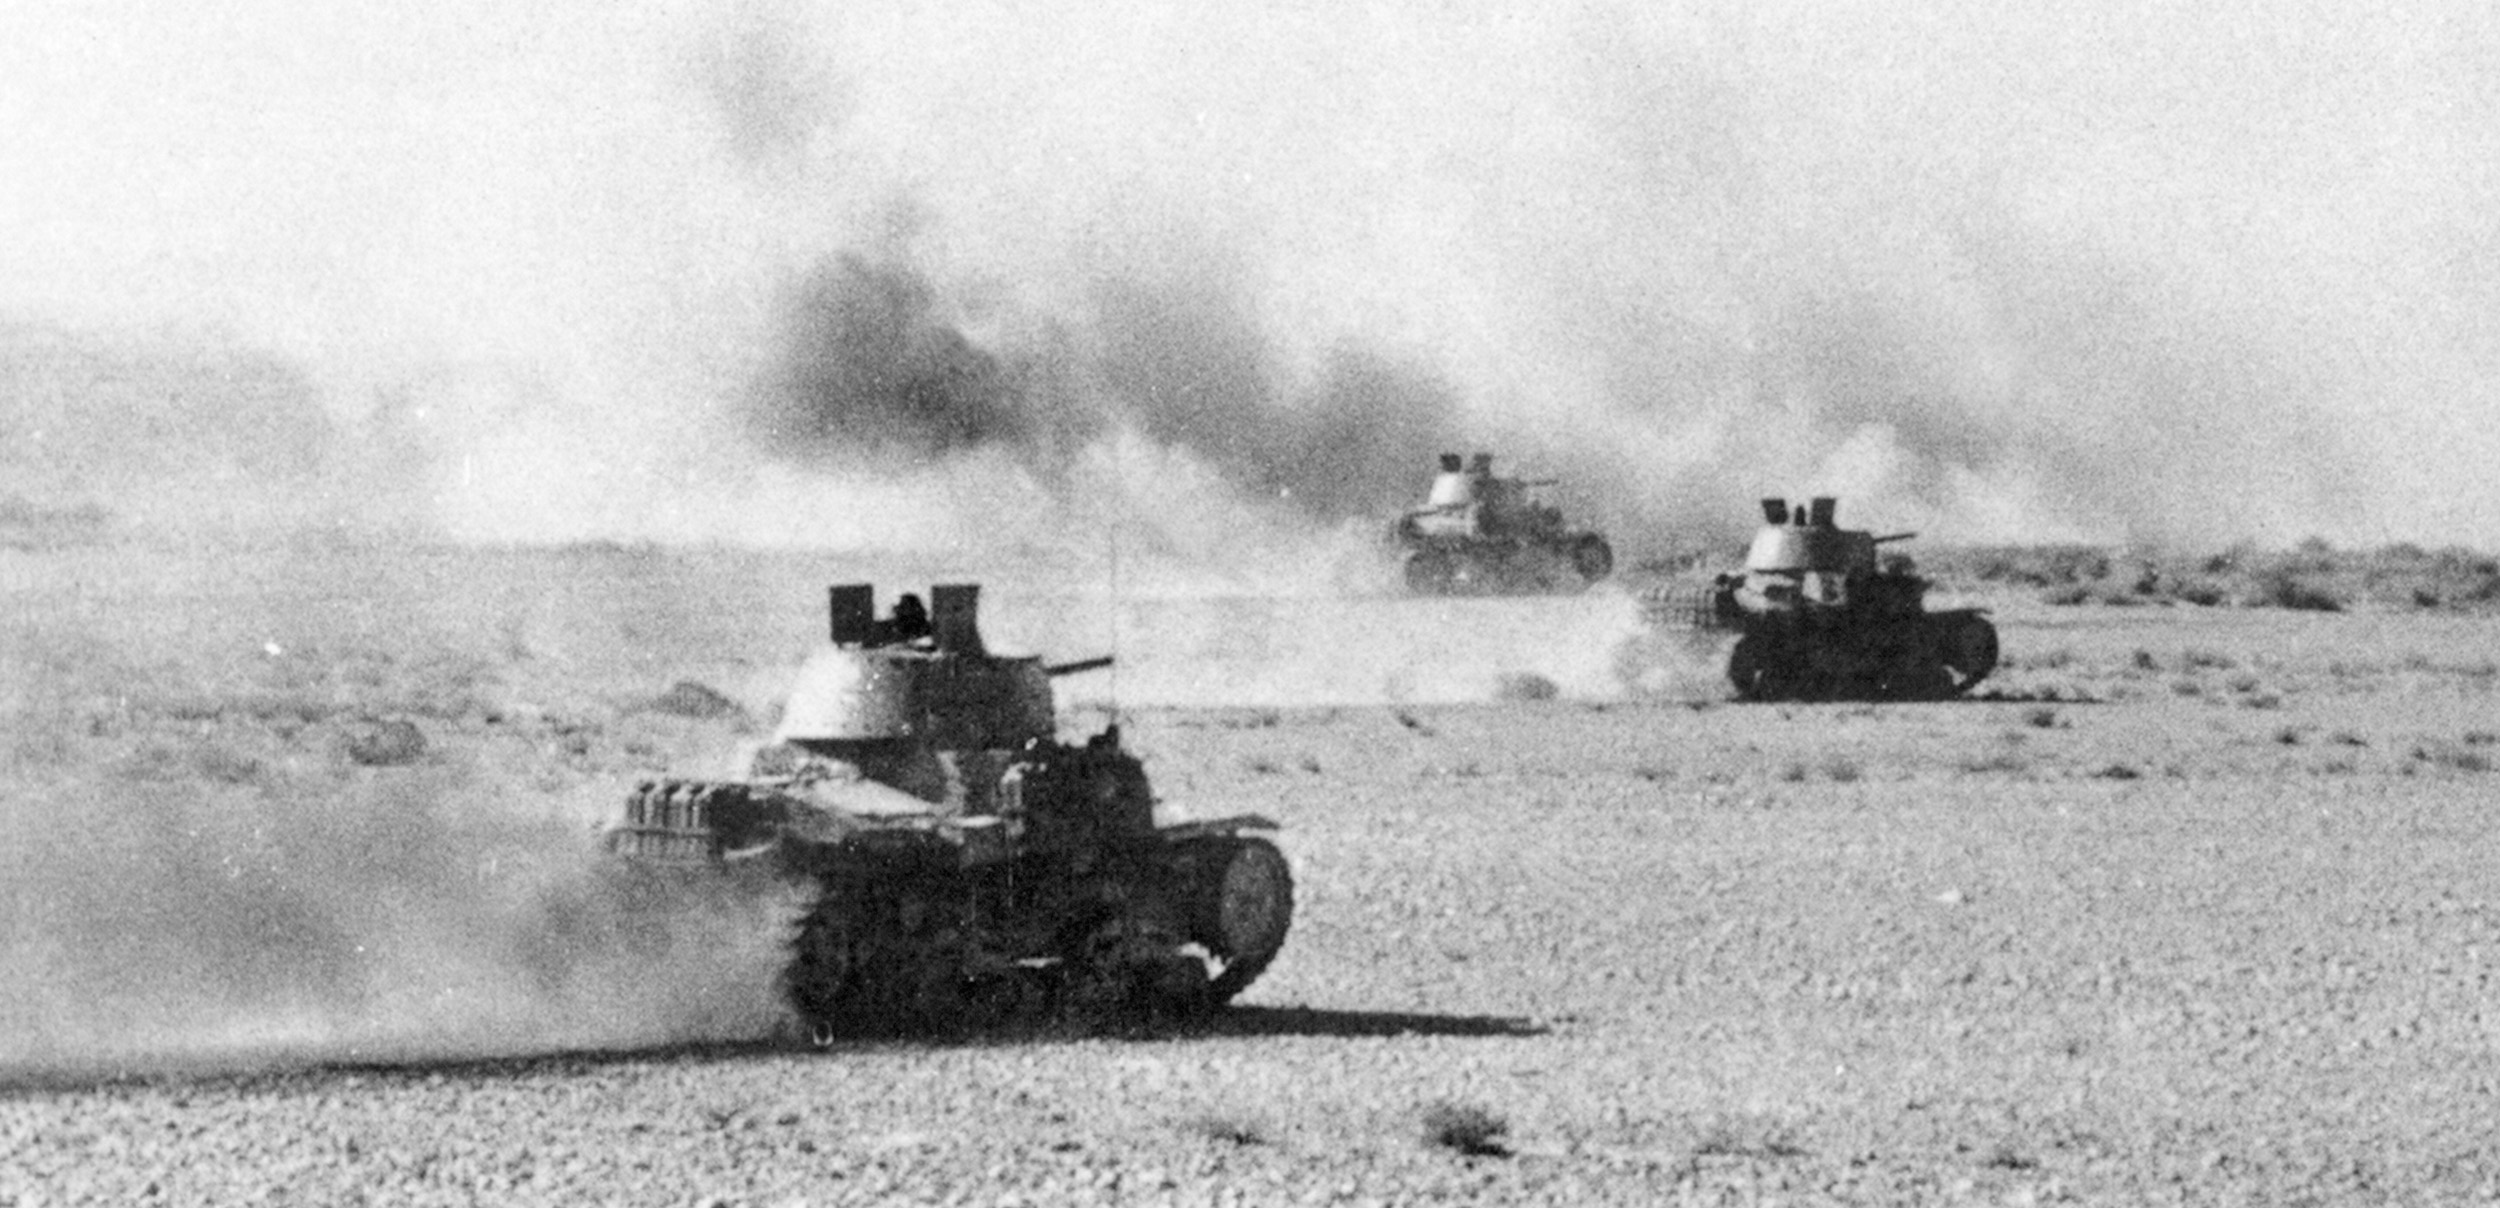 Badly outclassed, Italian tanks charge toward British guns in one of many desperate but futile counterattacks at Beda Fomm. During Operation Compass, Italian armor proved no match for British firepower and tactics.